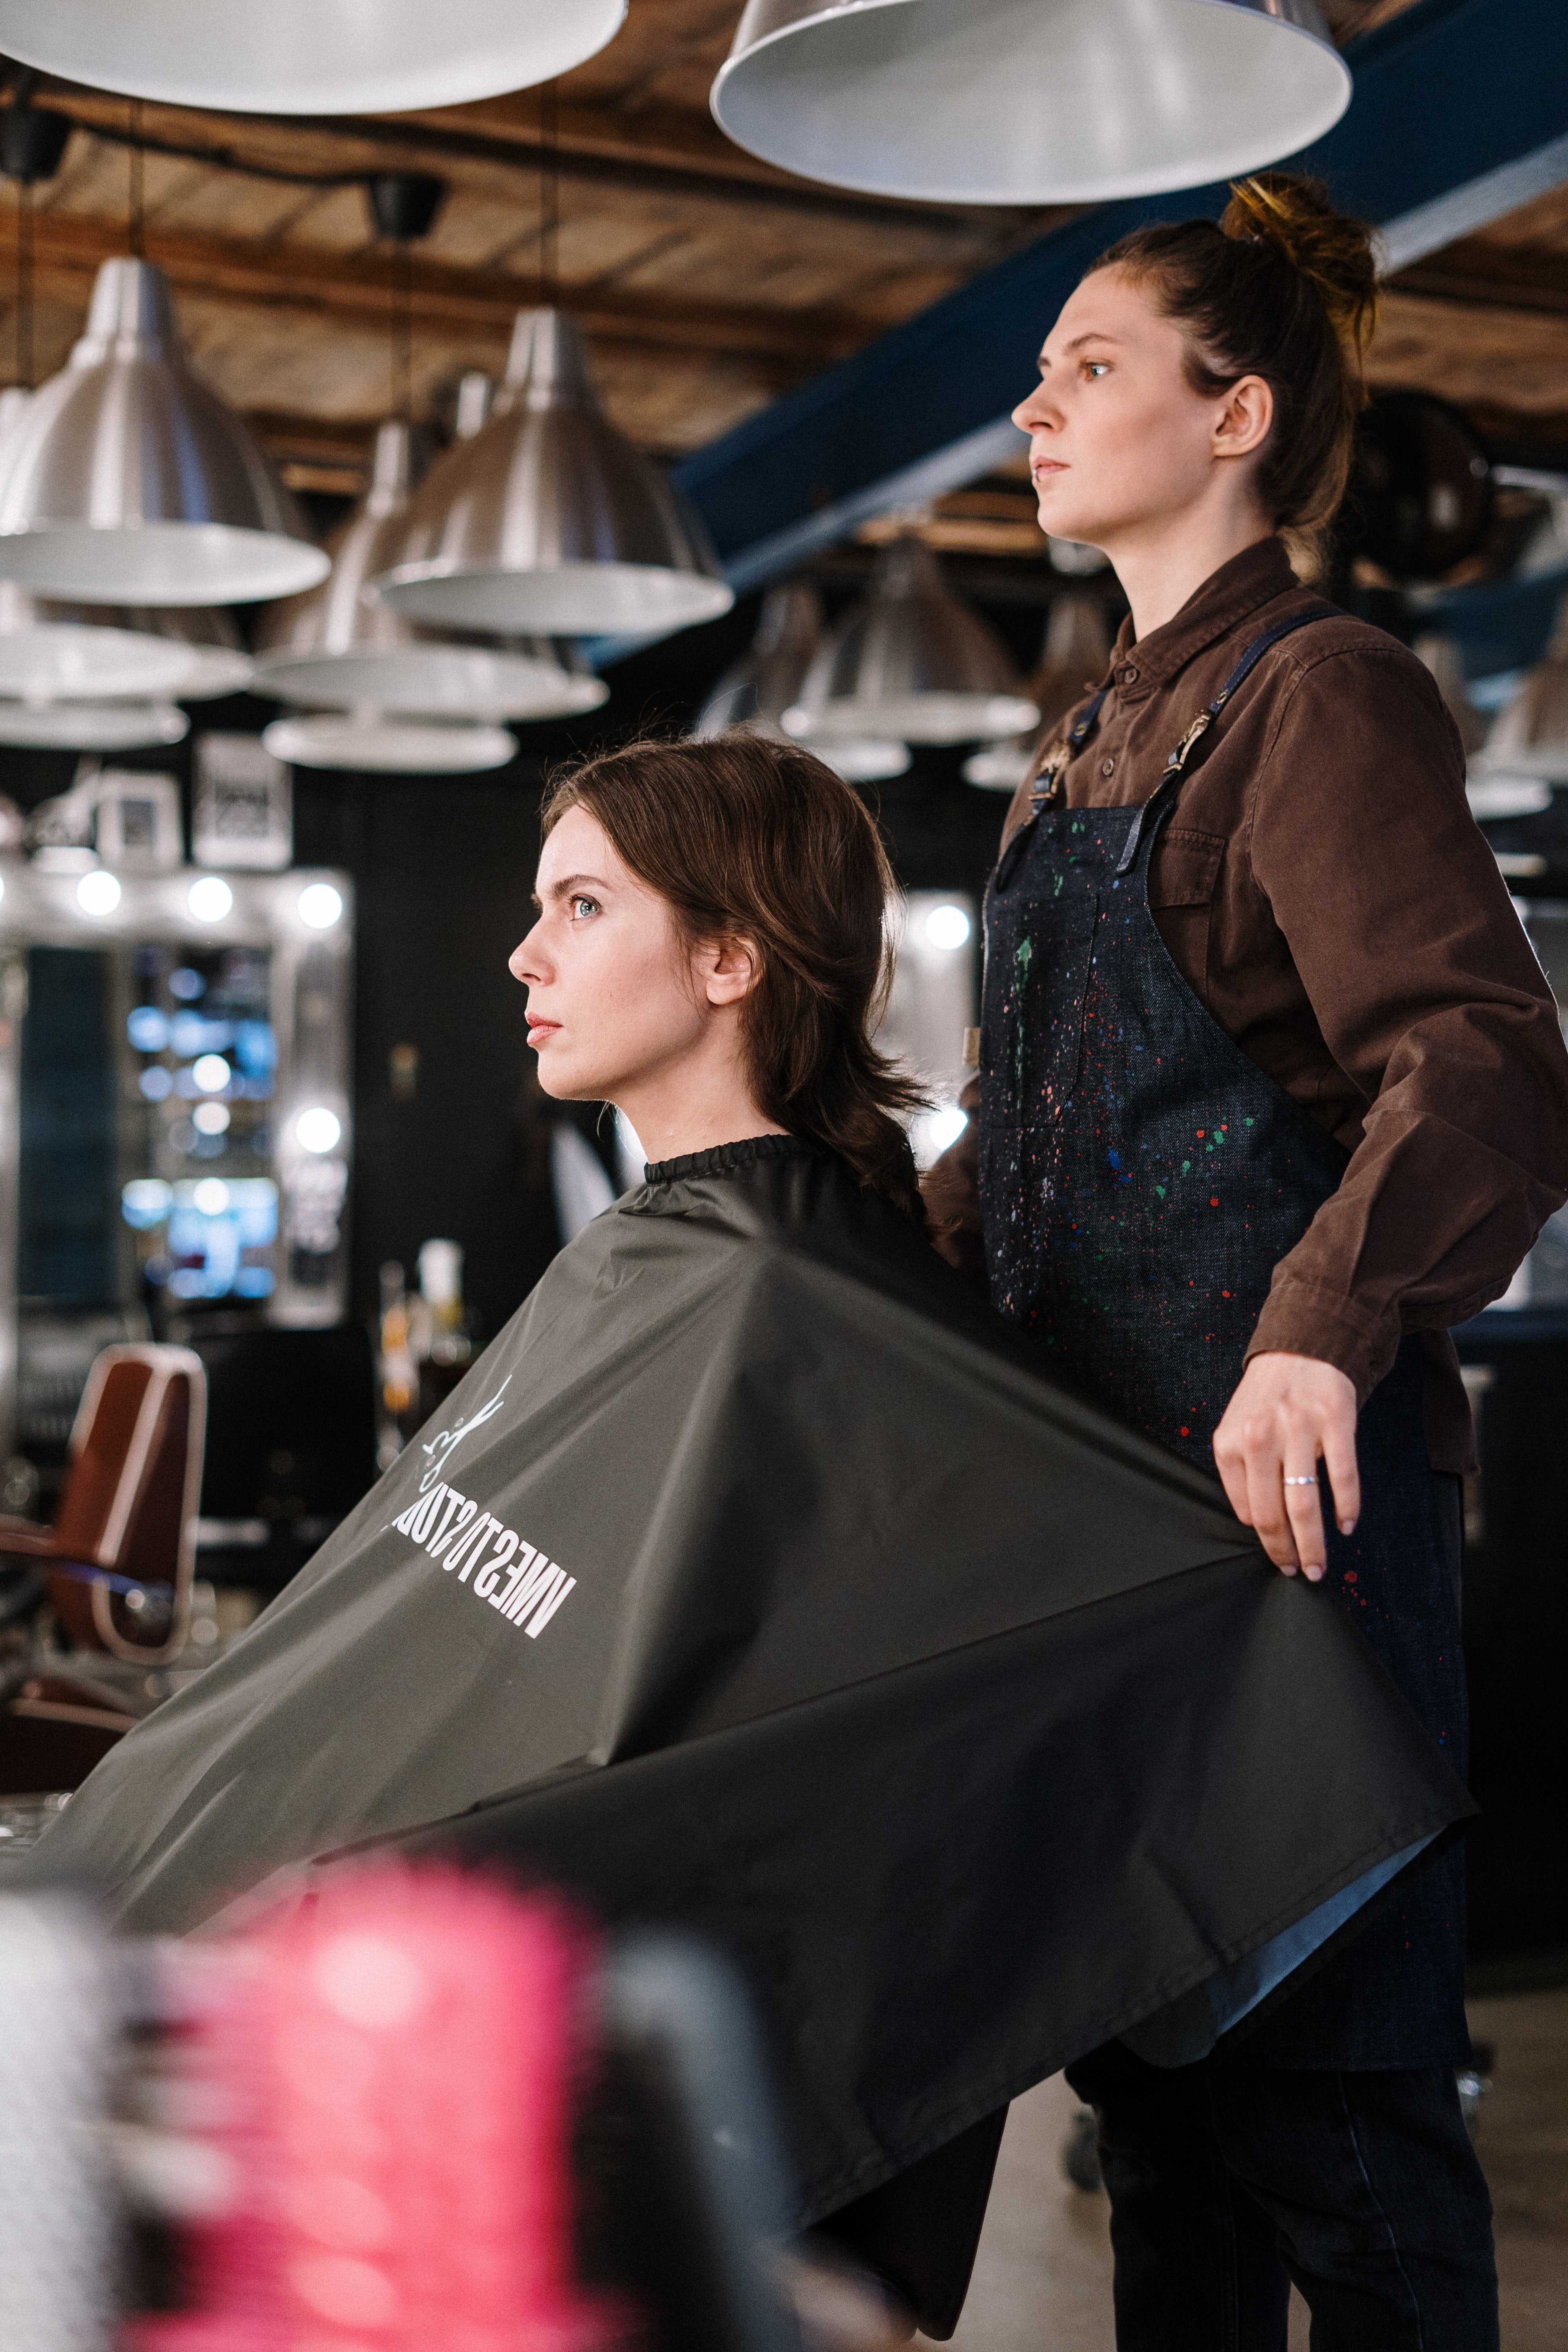 Woman in a salon with a hair stylist | Source: Pexels